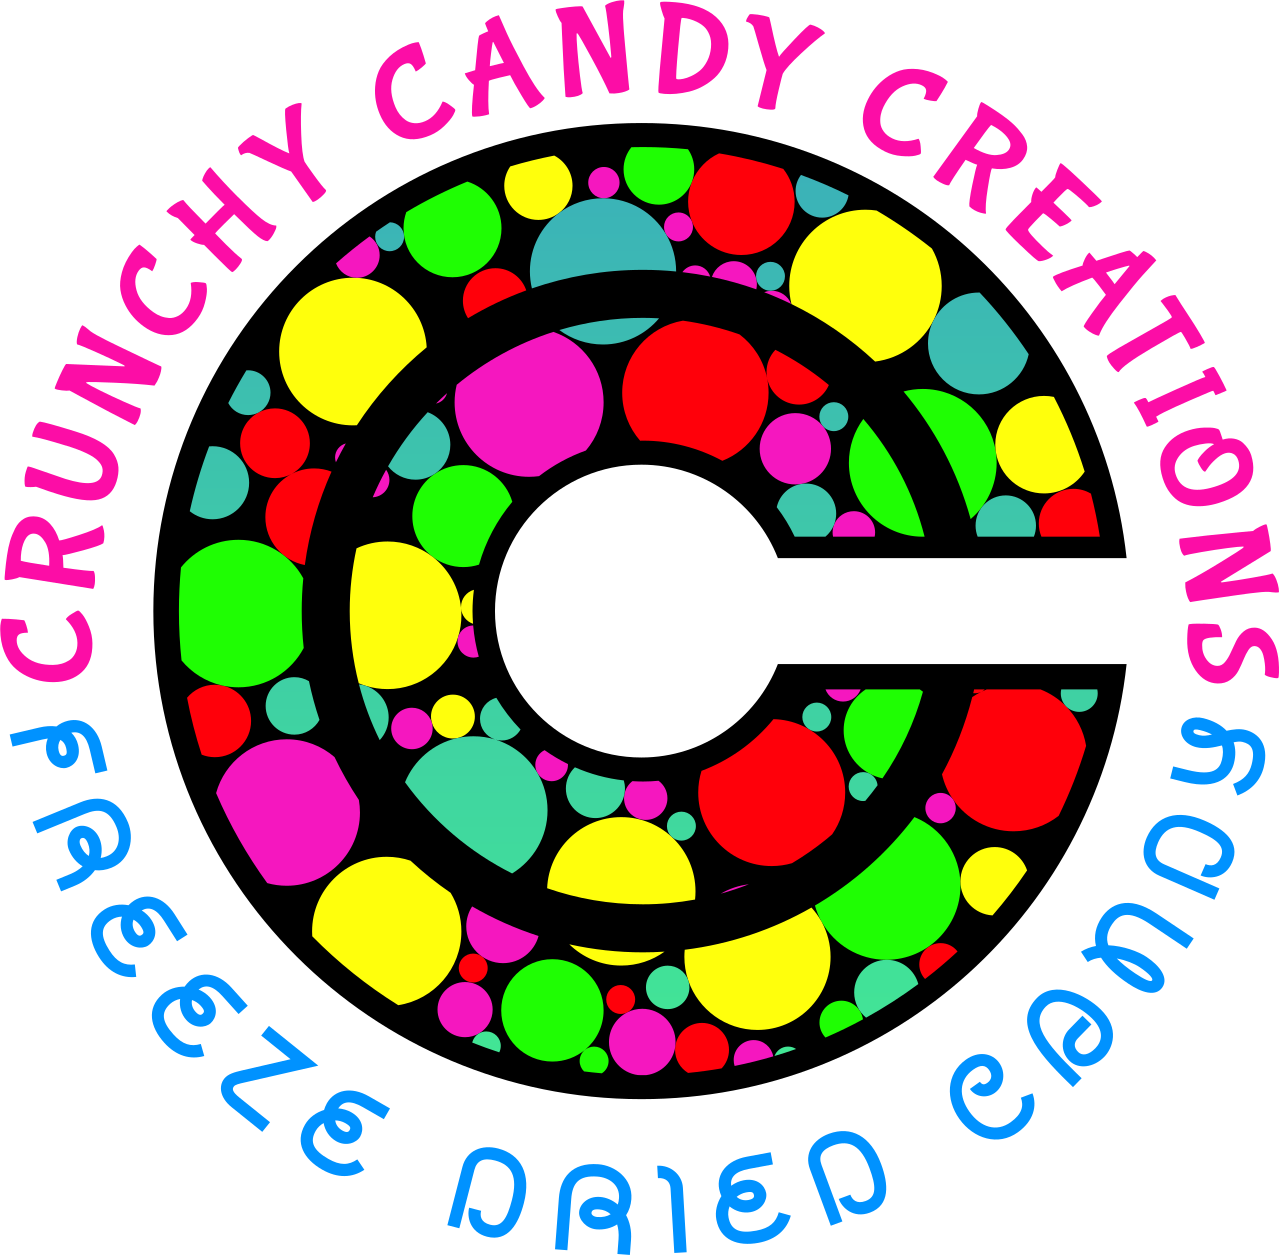 CRUNCHY CANDY CREATIONS's logo